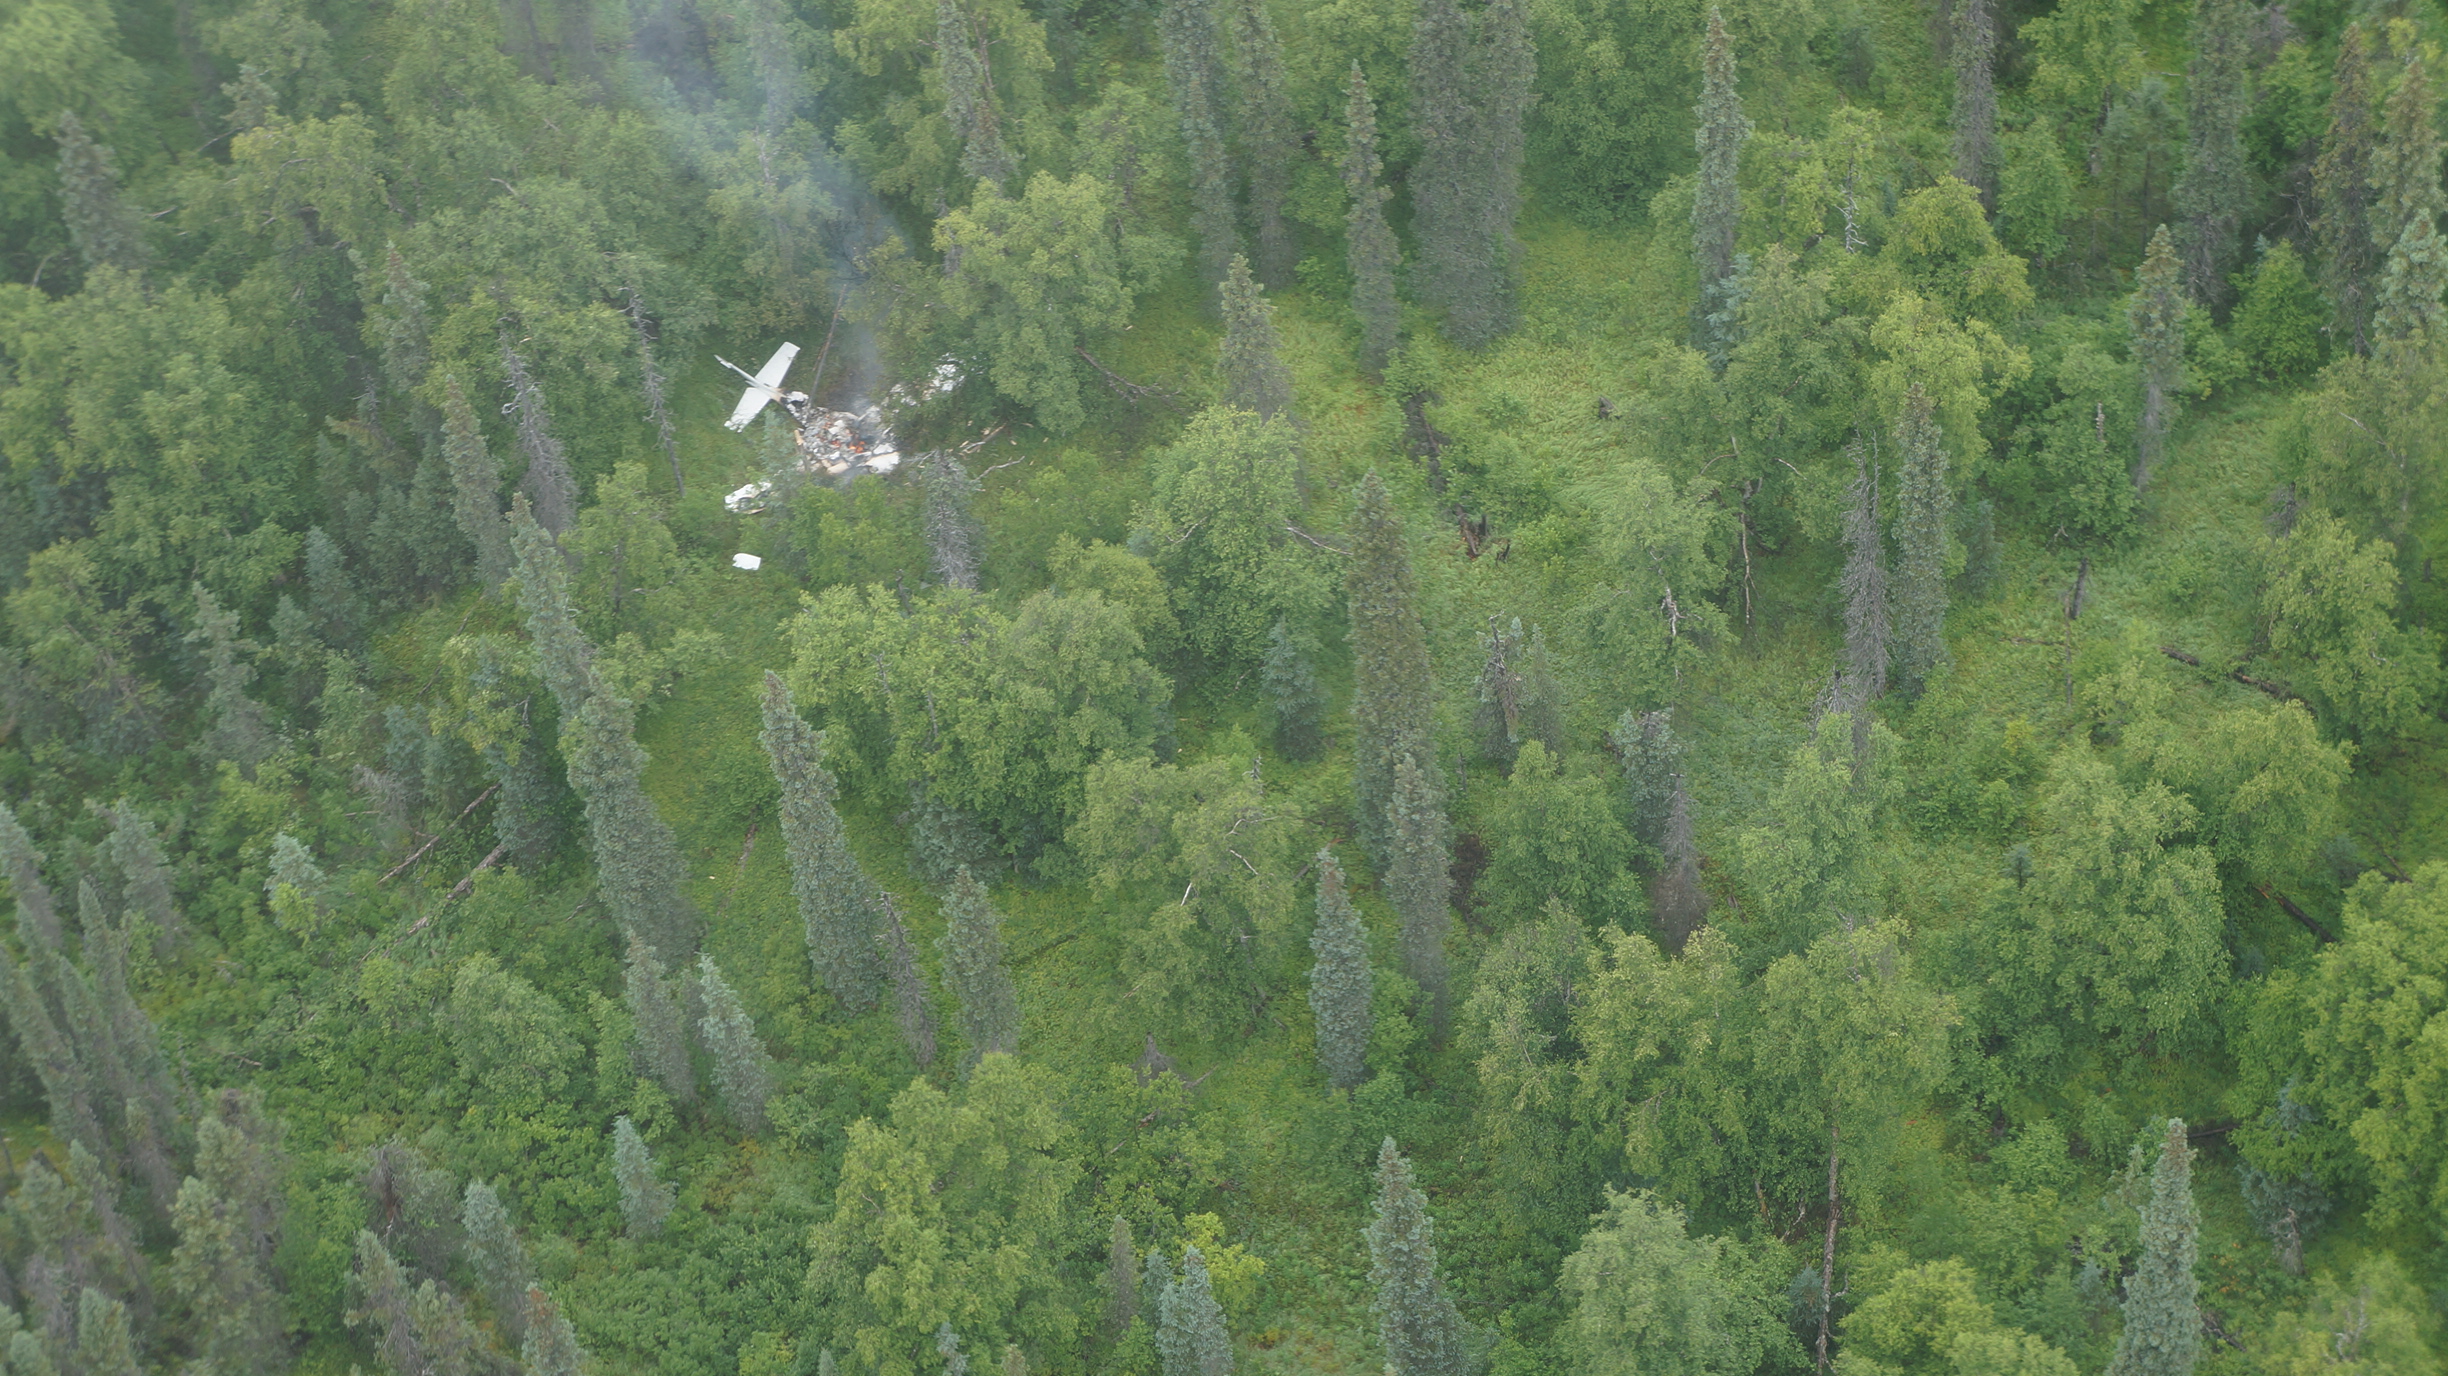 An aerial image of a broken plane in a forested area